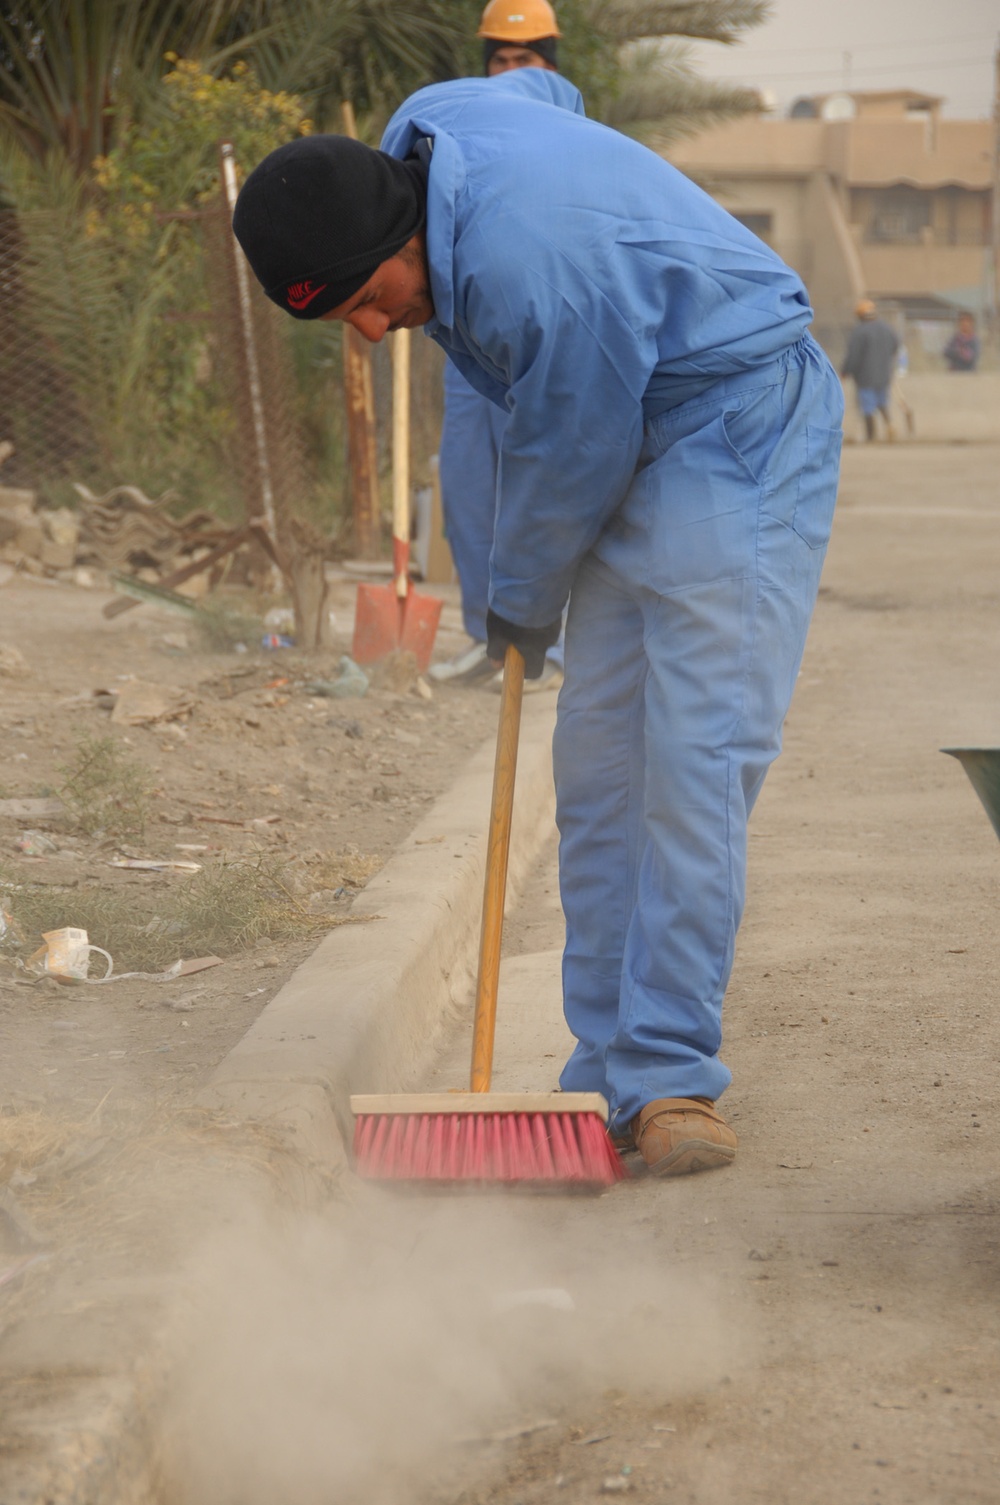 Local nationals hired to clean up streets in Gazaliyah